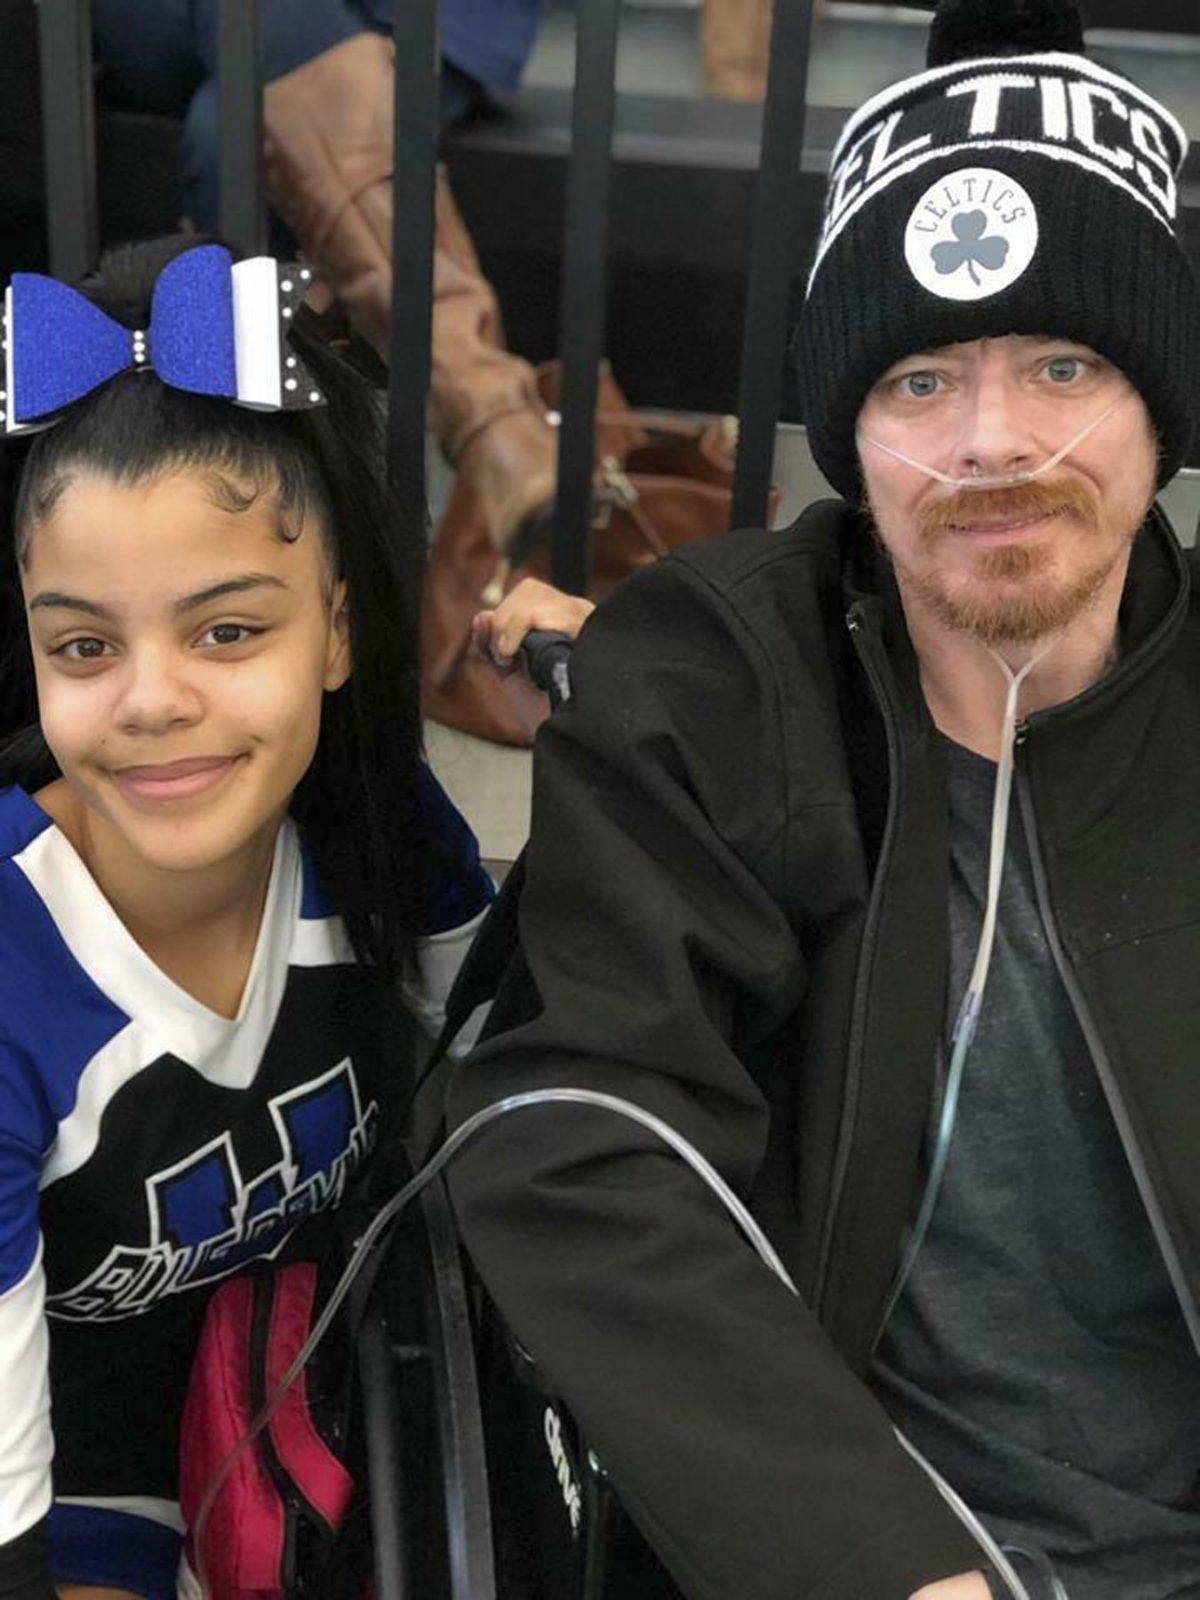 In this photo provided by Bridgette Hoskie, her daughter Tianna Greene and brother Jay Barrett pose for a photo at a cheerleading competition in New Haven, Conn., on March 3, 2019. (Bridgette Hoskie via AP, File)